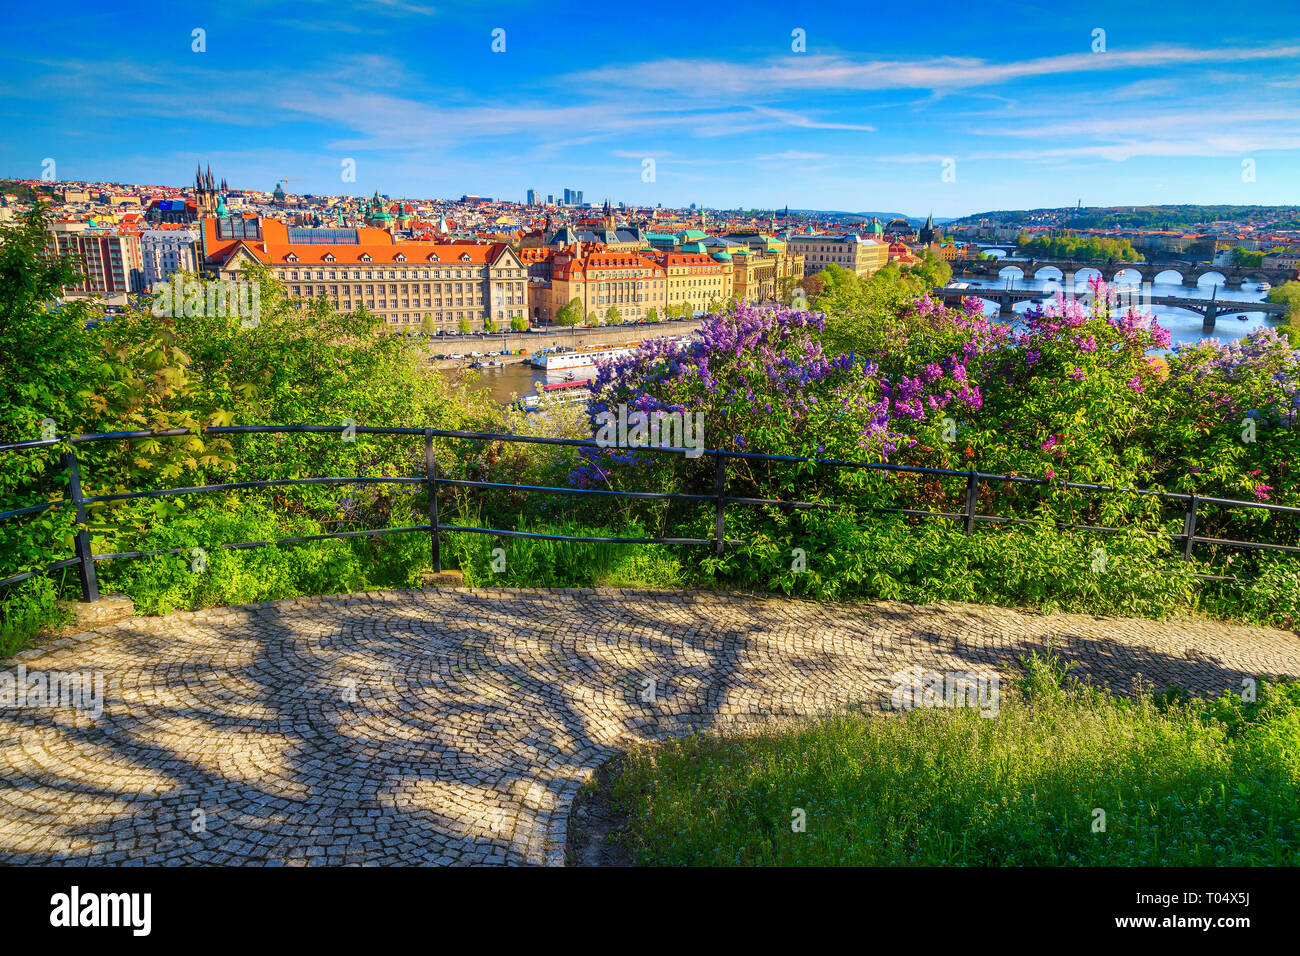 Stunning touristic and travel location. Vltava river and bridges with passenger boats. City center with colorful spring lilac flowers in public park,  Stock Photo